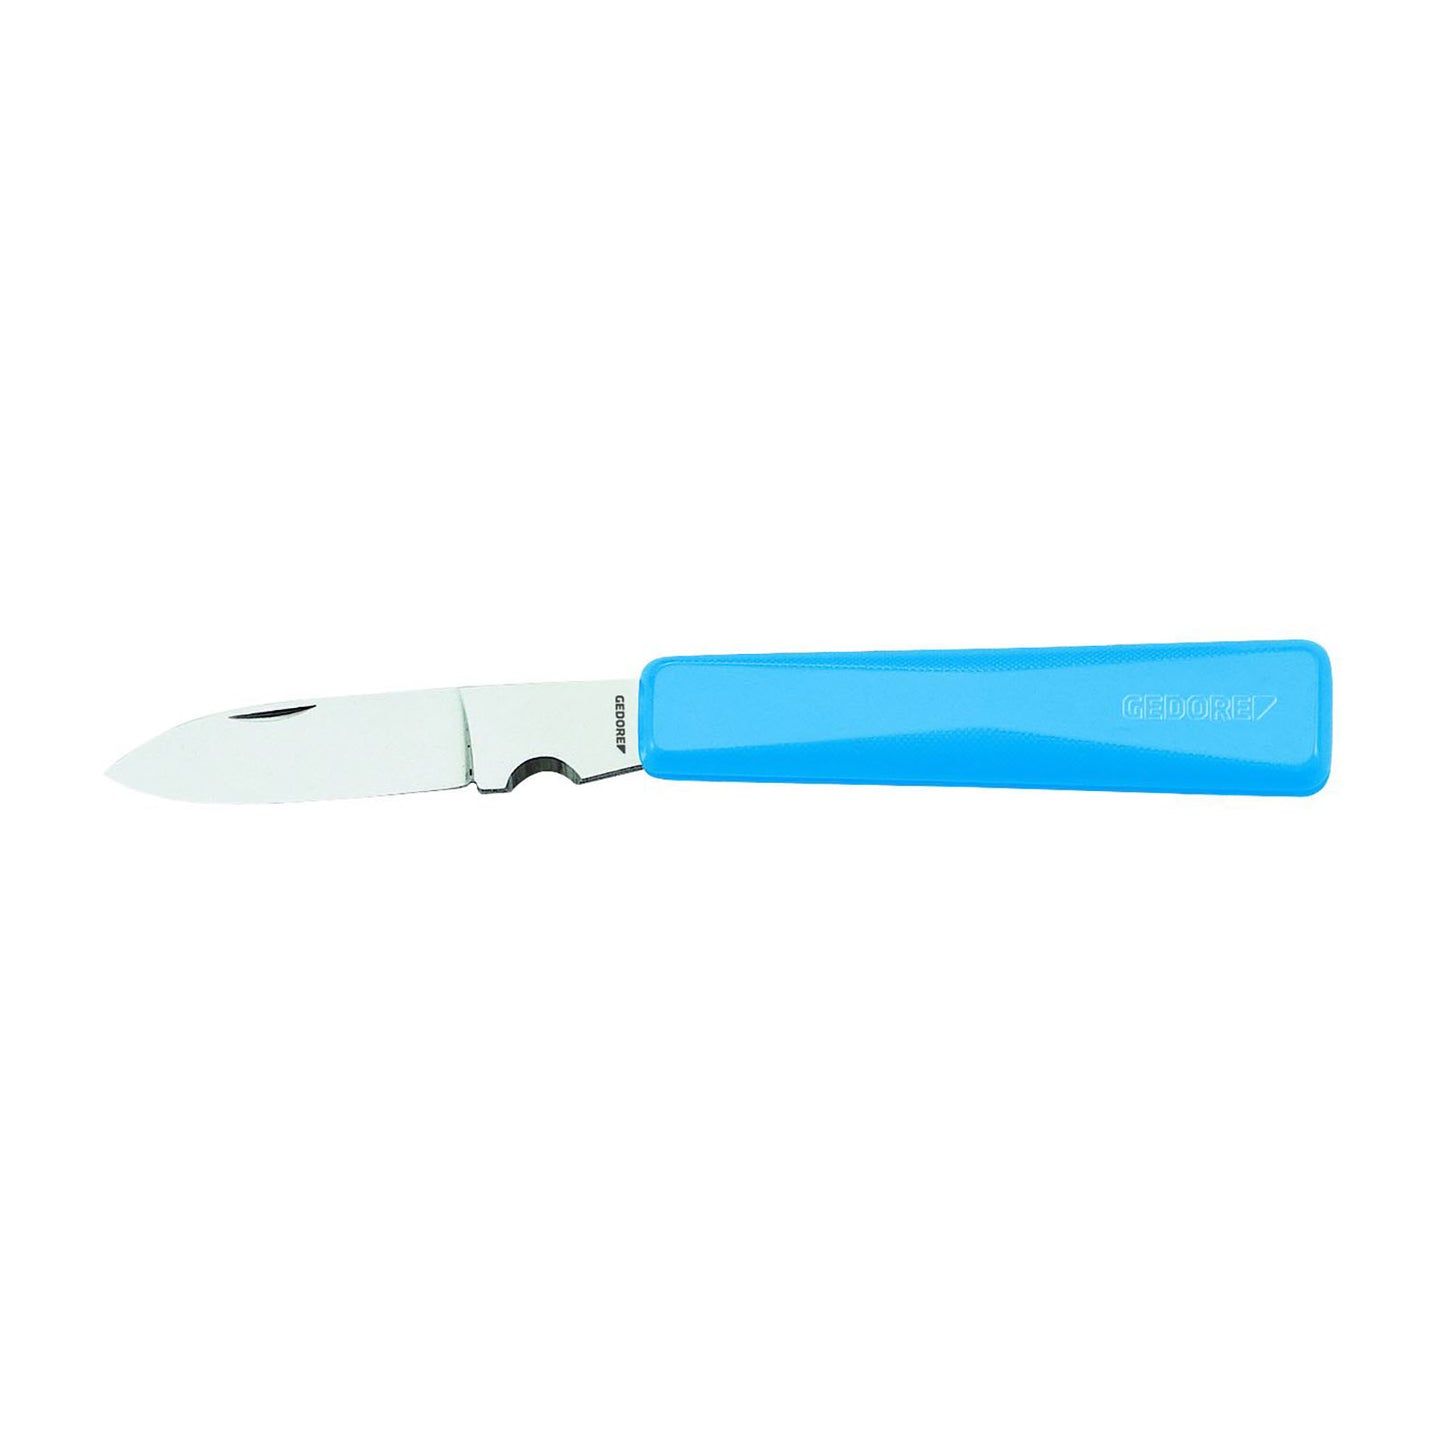 GEDORE 0063-08 - Cable Knife (9101200)